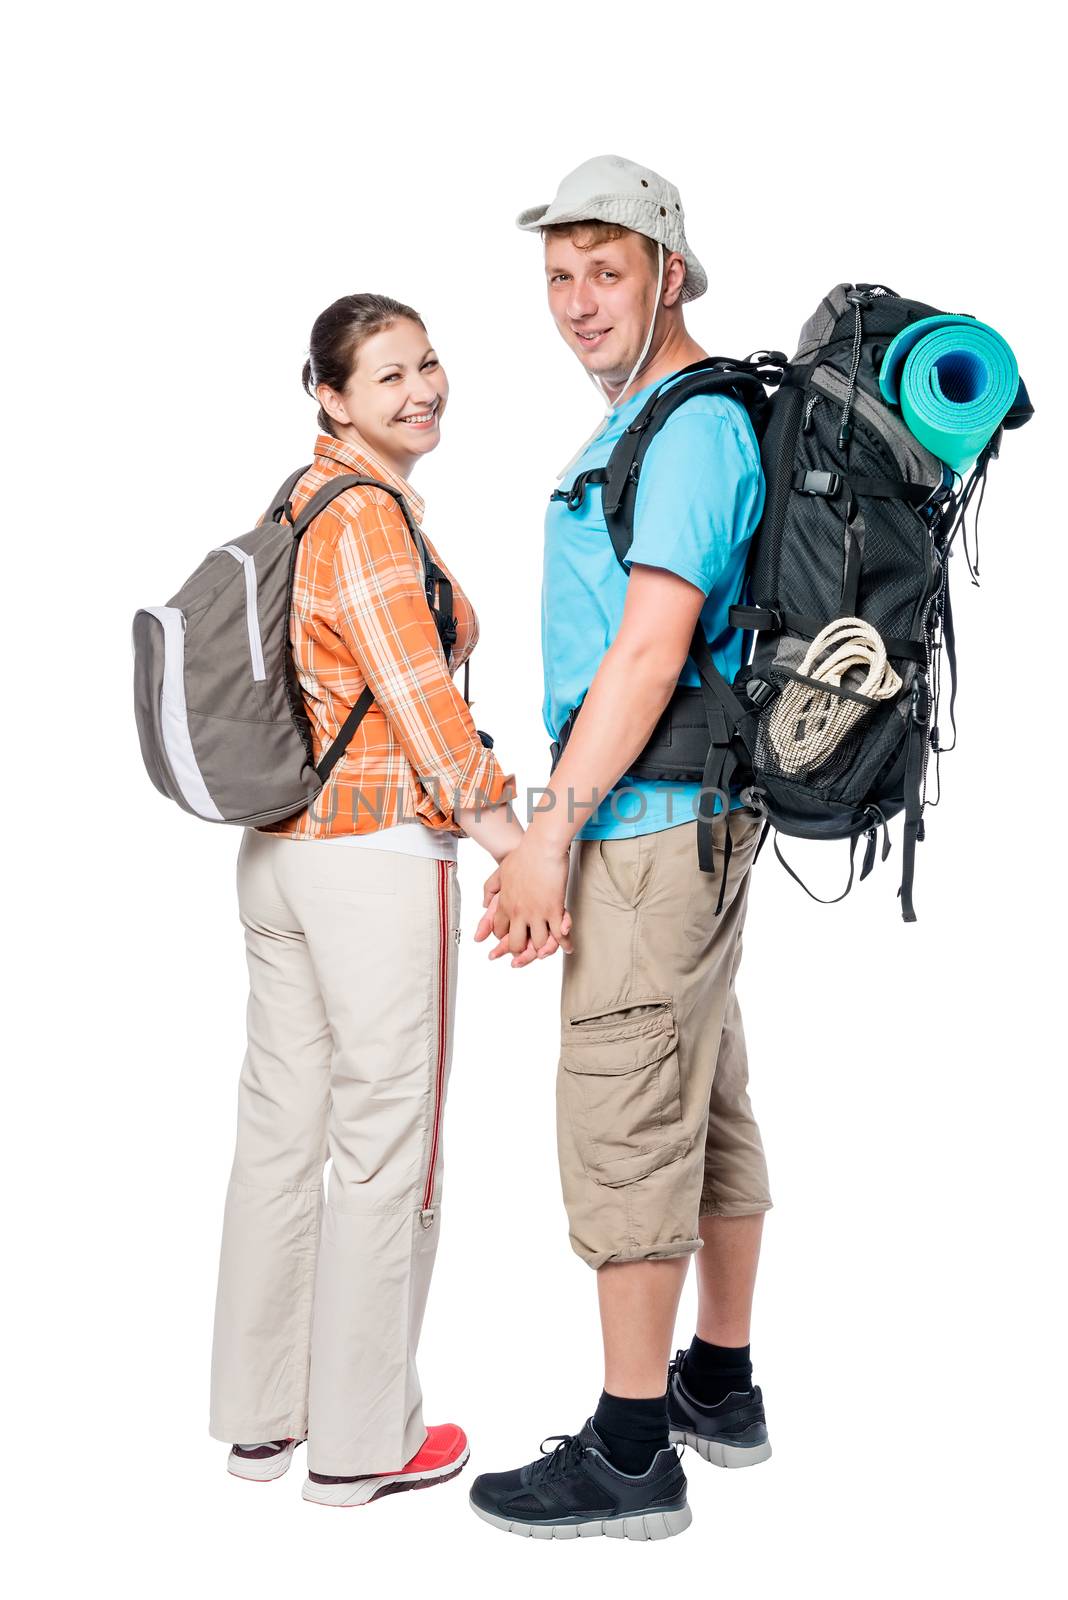 Happy couple with backpacks holding hands in studio on white bac by kosmsos111